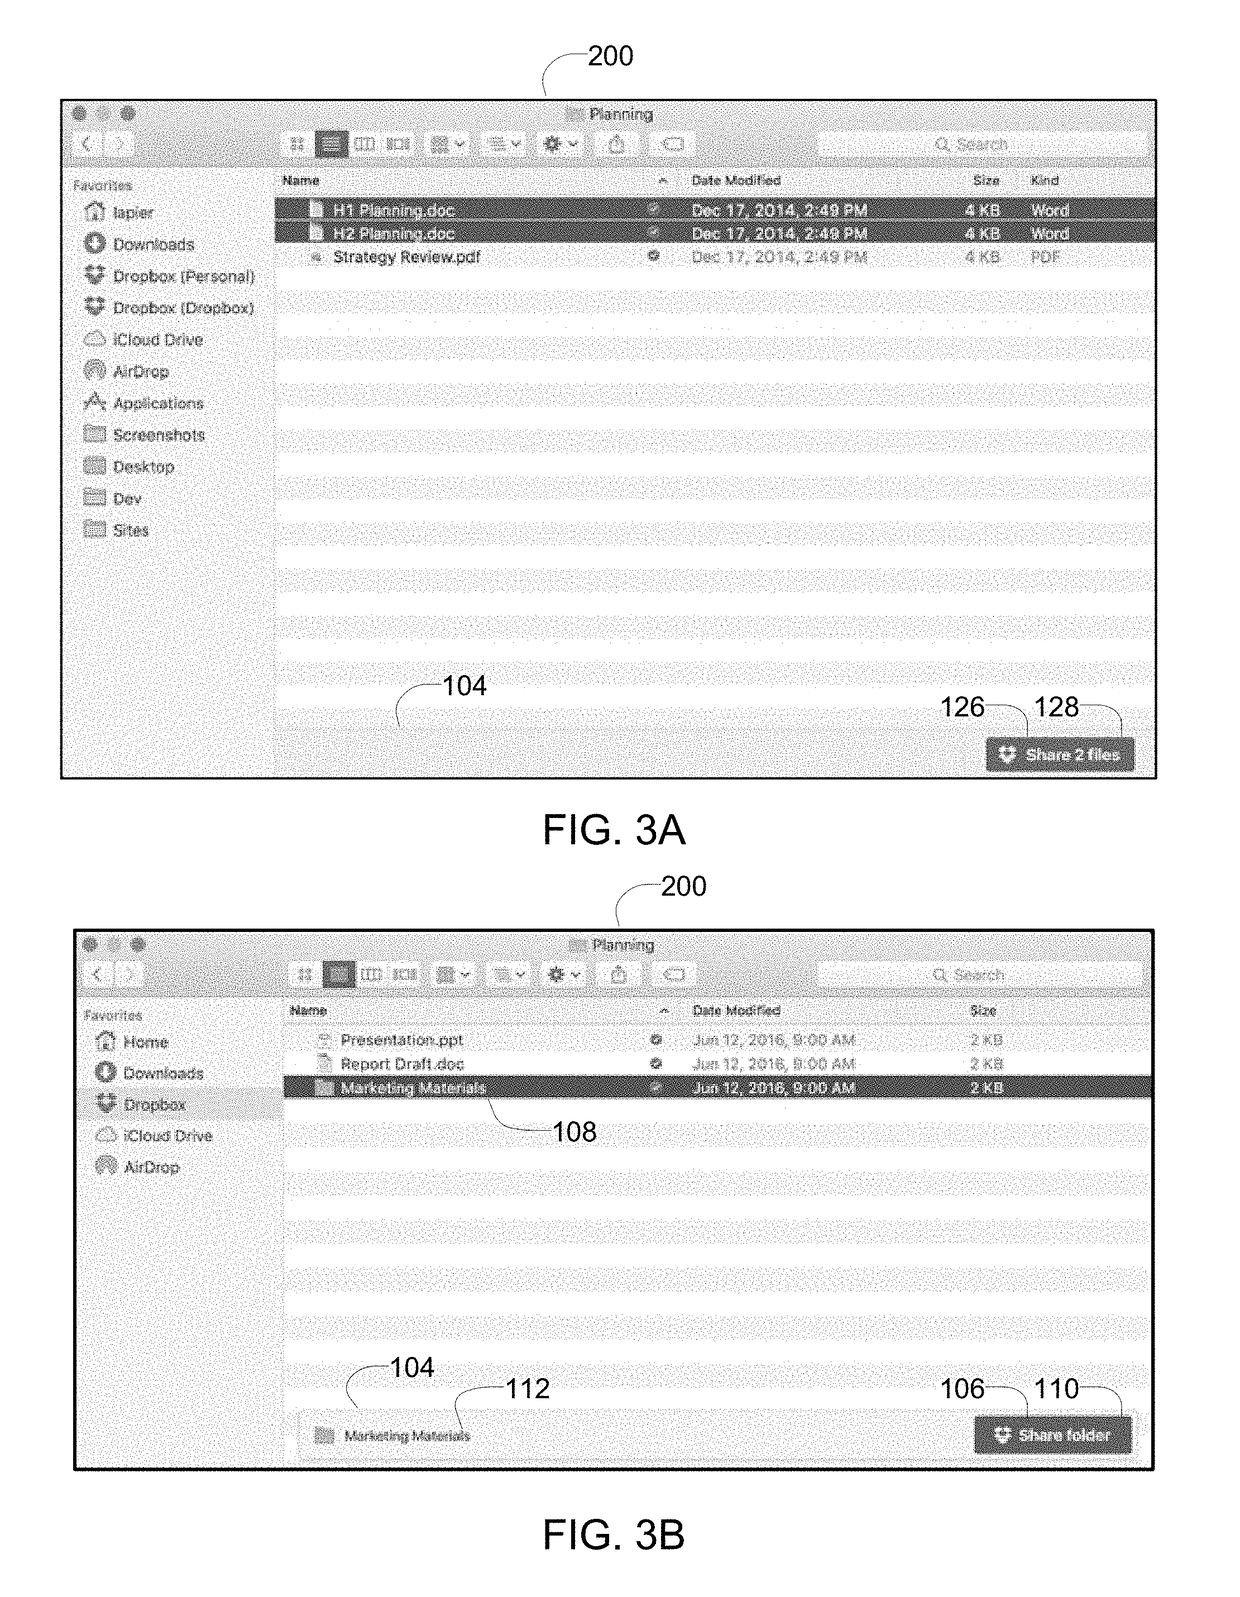 User interface for content sharing client in a desktop file system context